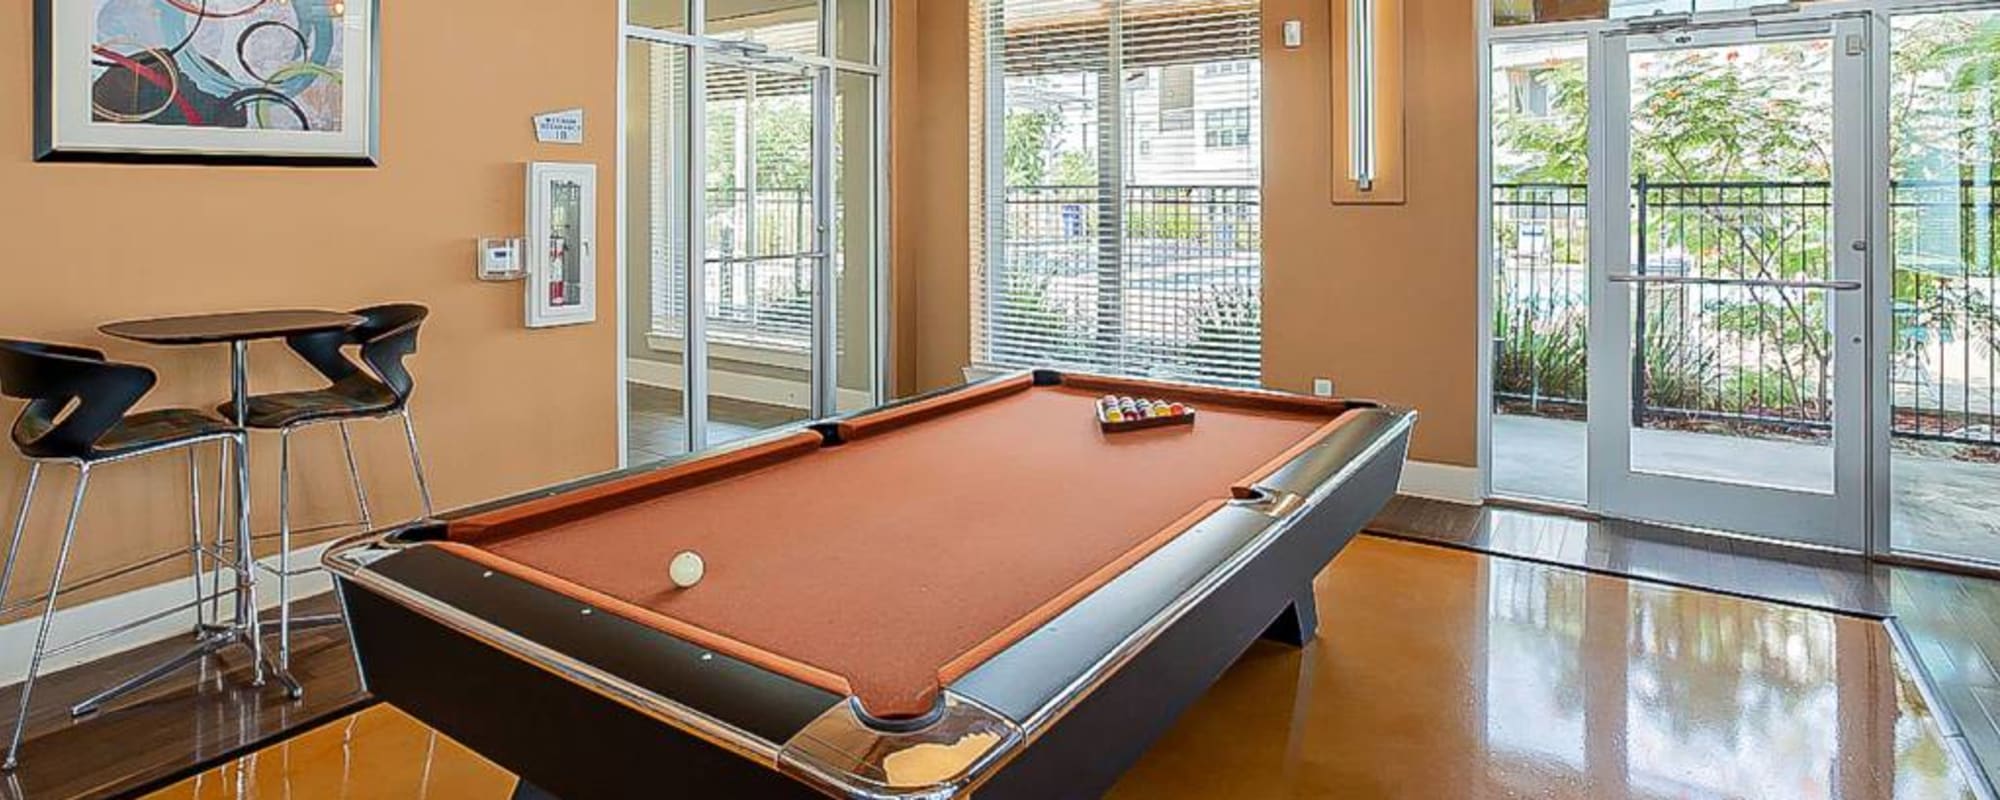 Clubroom at The Landings at Brooks City-Base in San Antonio, Texas